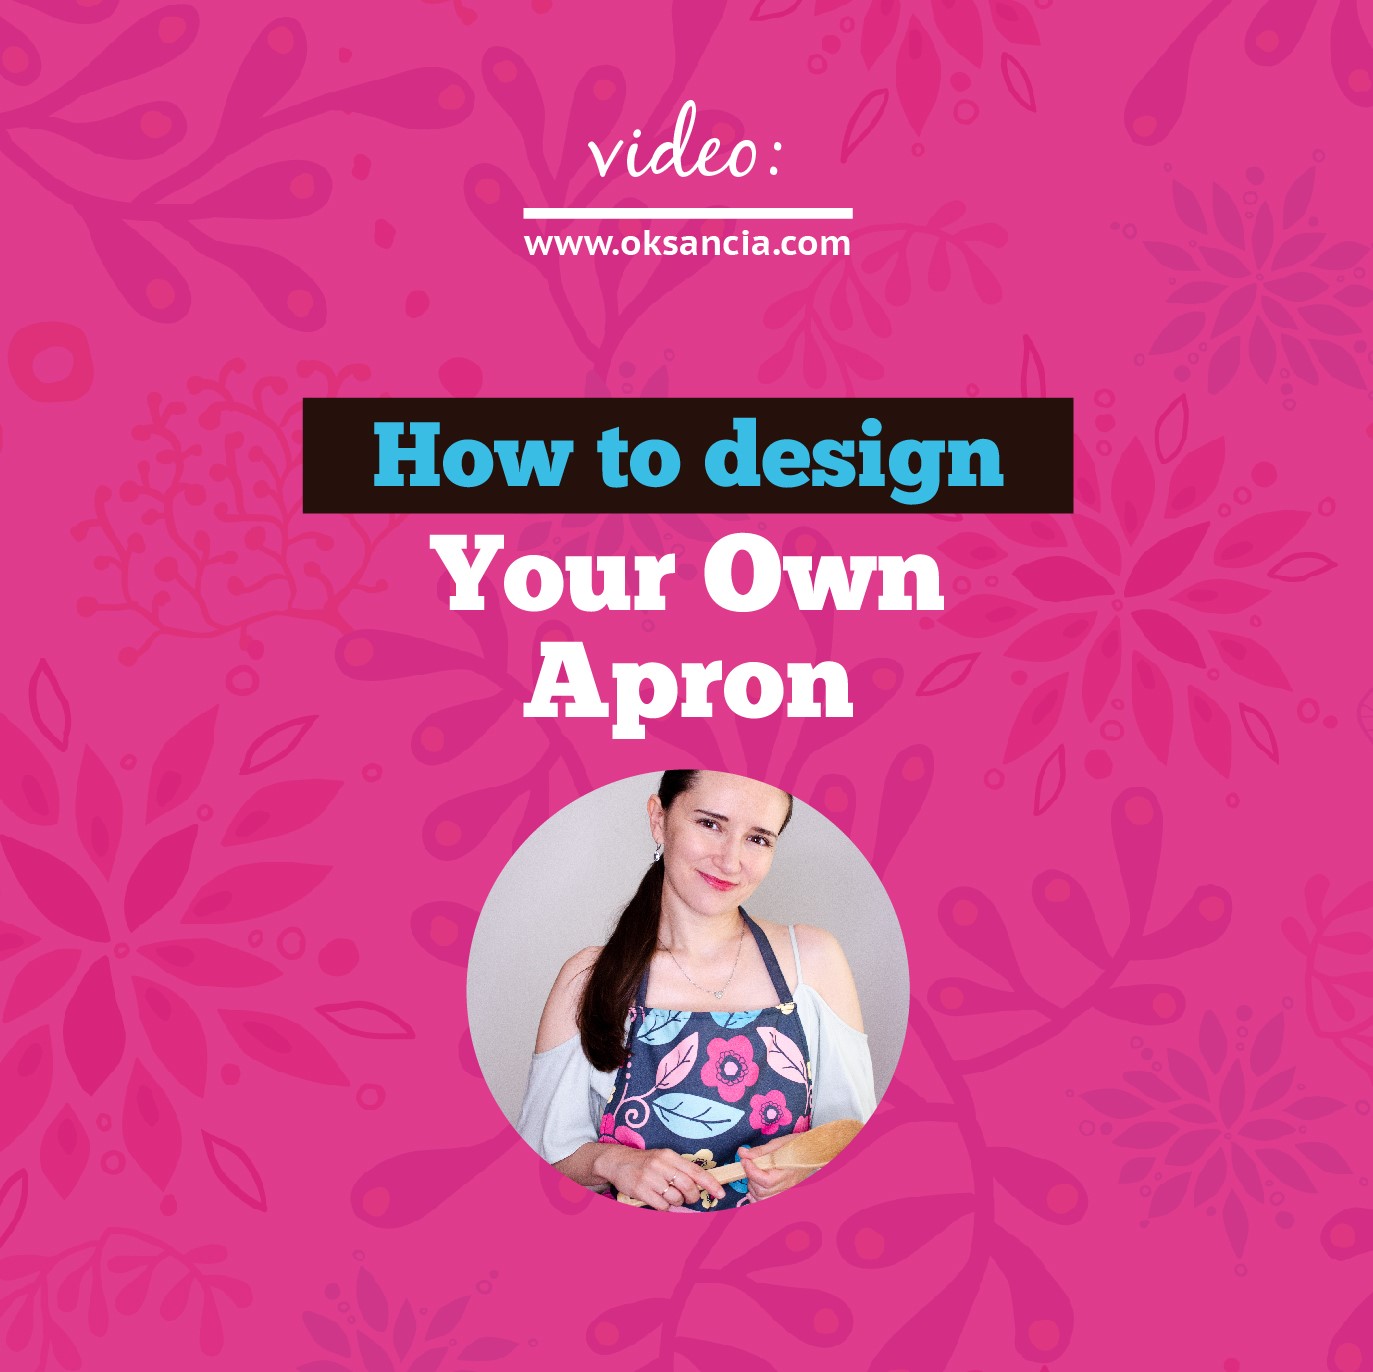 How to design your own apron: print-on-demand apron tutorial with a repeat pattern